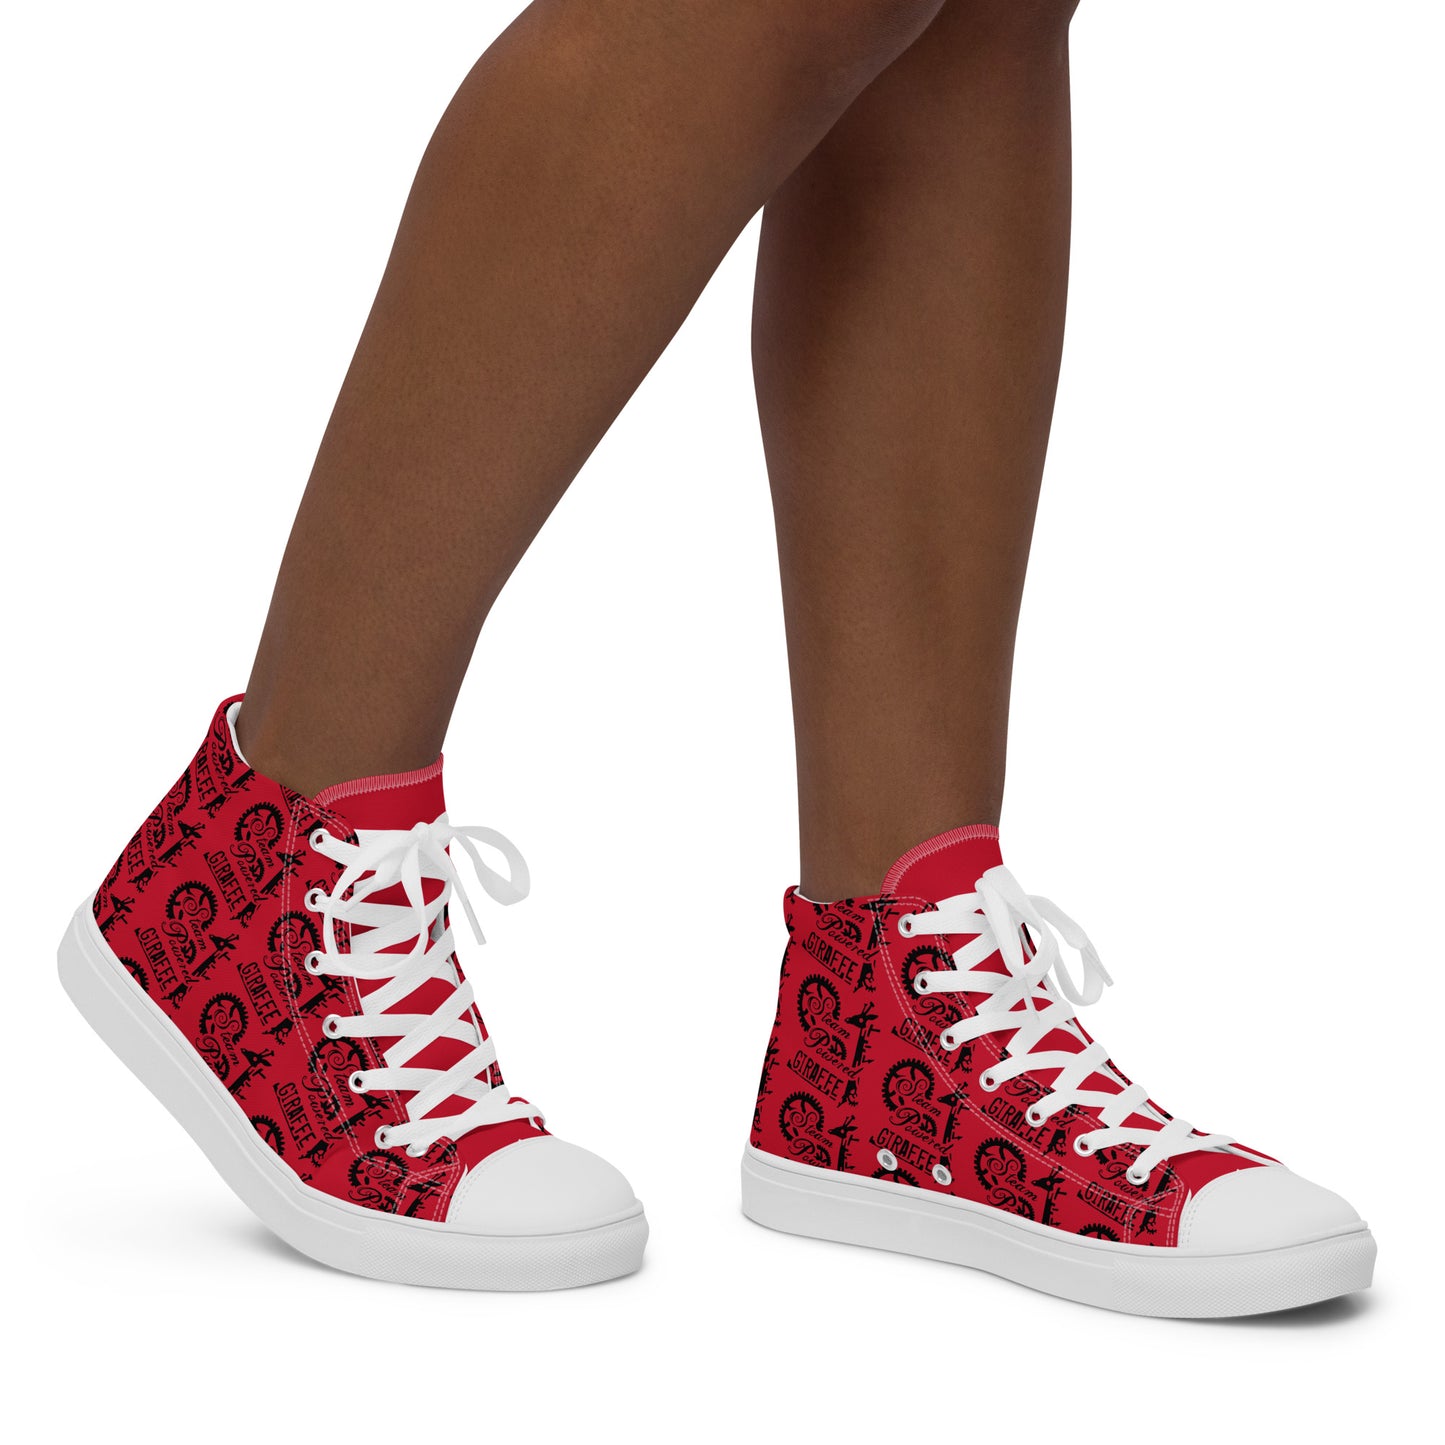 Women’s Red SPG Logo High Top Shoes